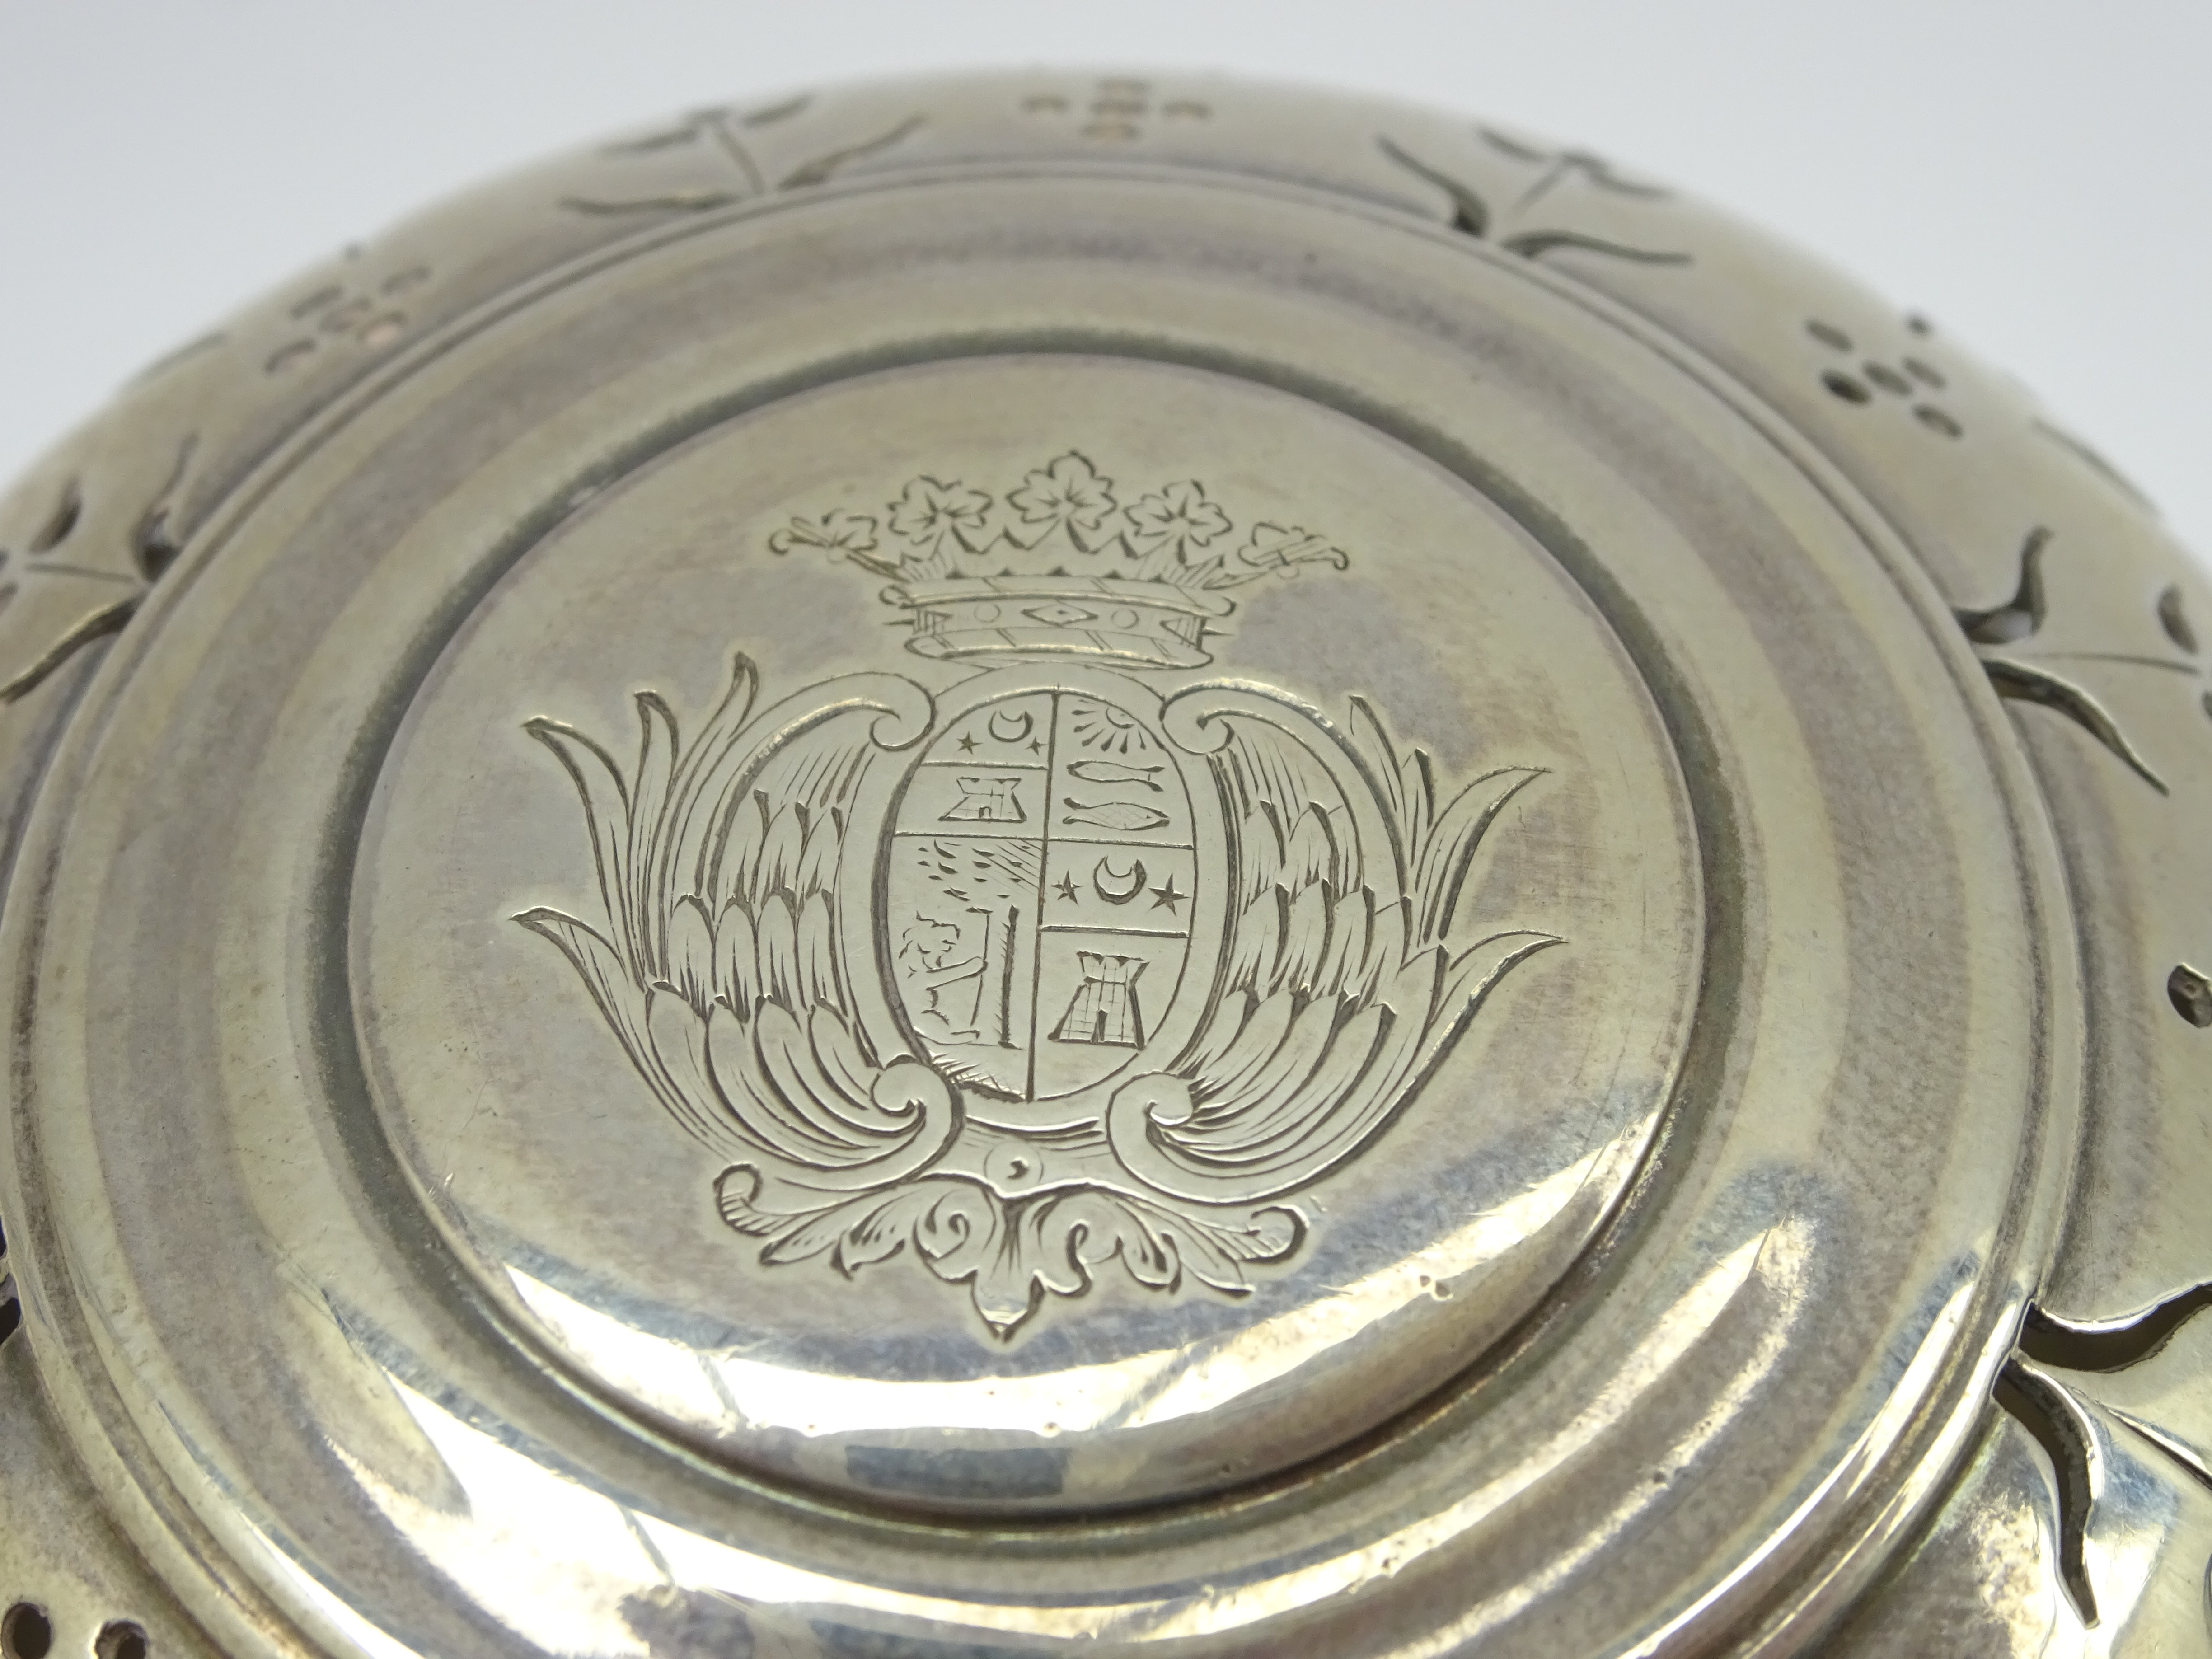 French silver sponge box of circular design with pierced cover and engraved with a coat of arms on - Image 2 of 3